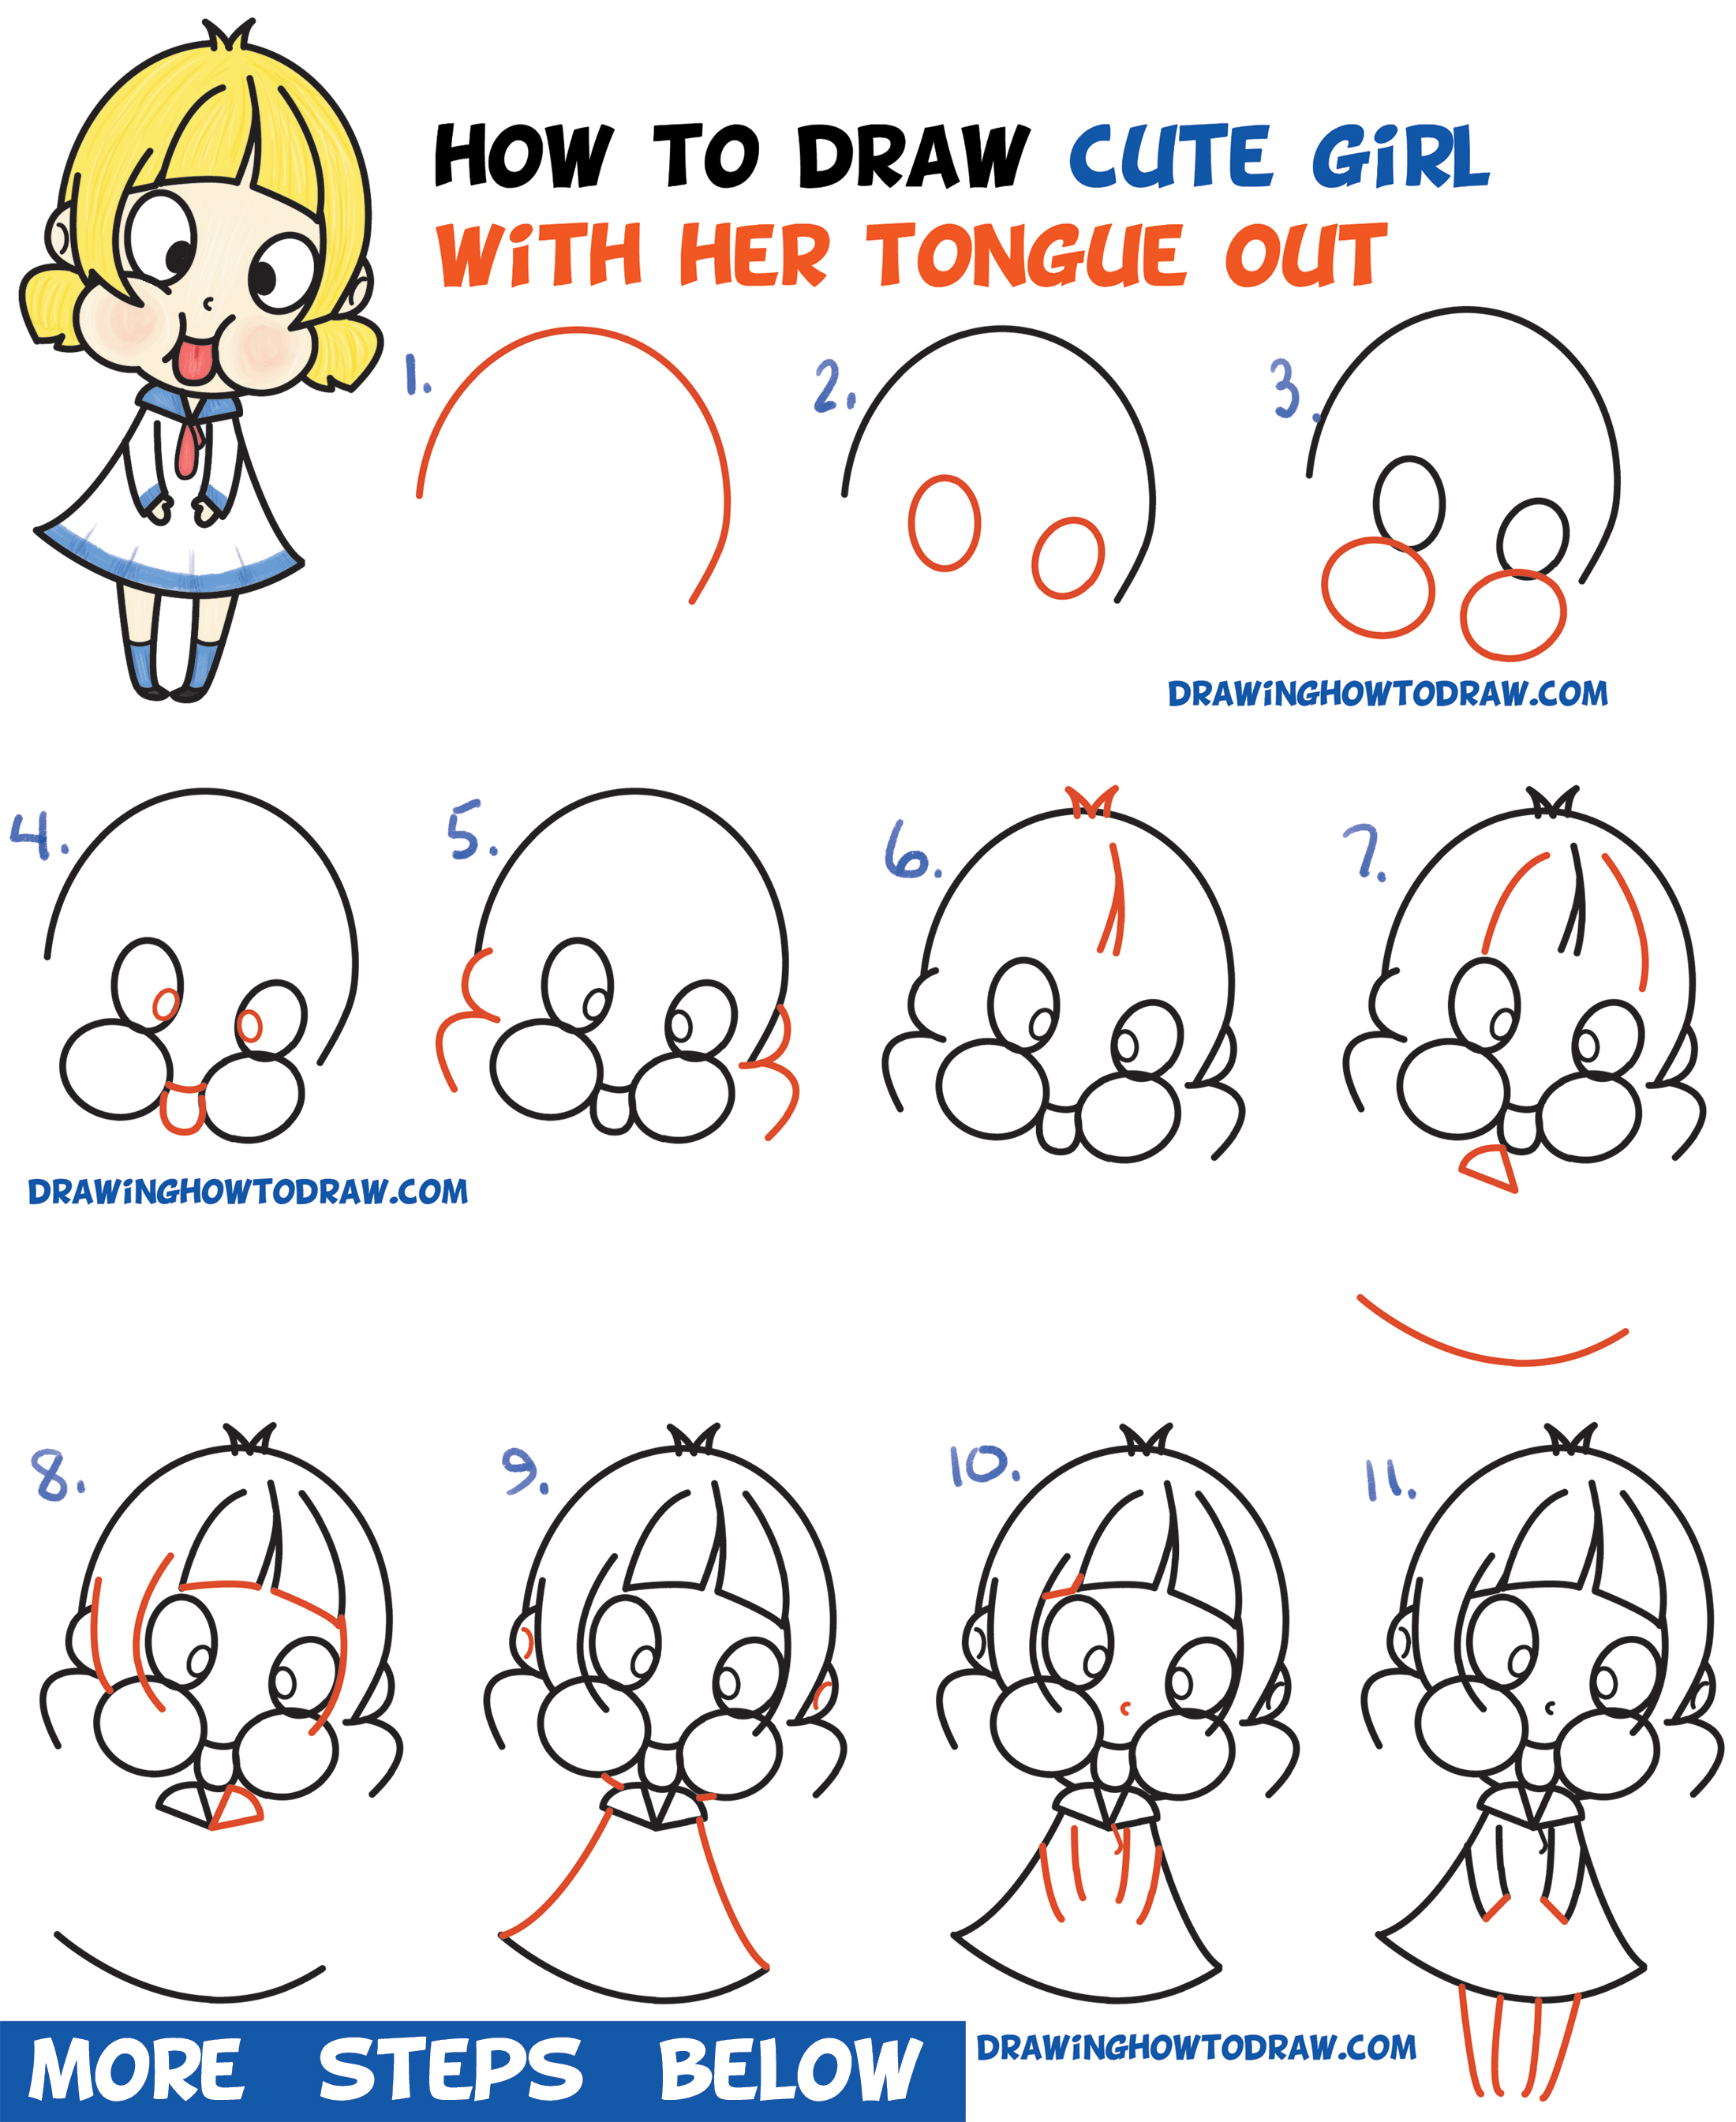 How to Draw a Cute Cartoon Girl (Chibi) Sticking Her Tongue Out Easy Step  by Step Drawing Tutorial for Kids - How to Draw Step by Step Drawing  Tutorials